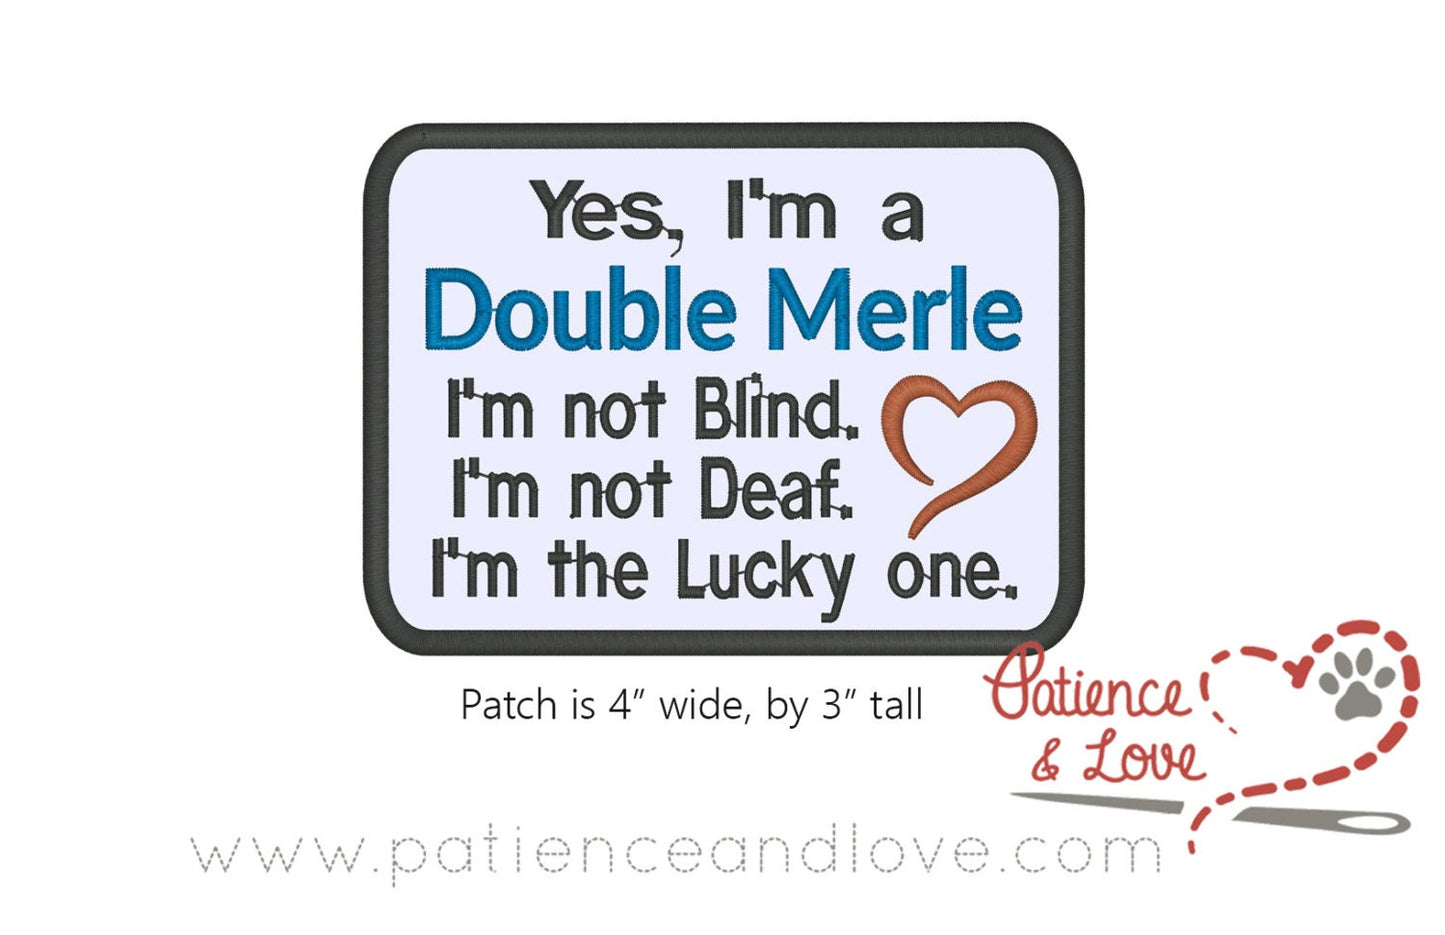 Yes, I'm a Double Merle, I'm not blind, not deaf, I'm the lucky one, 4" x 3" embroidered patch